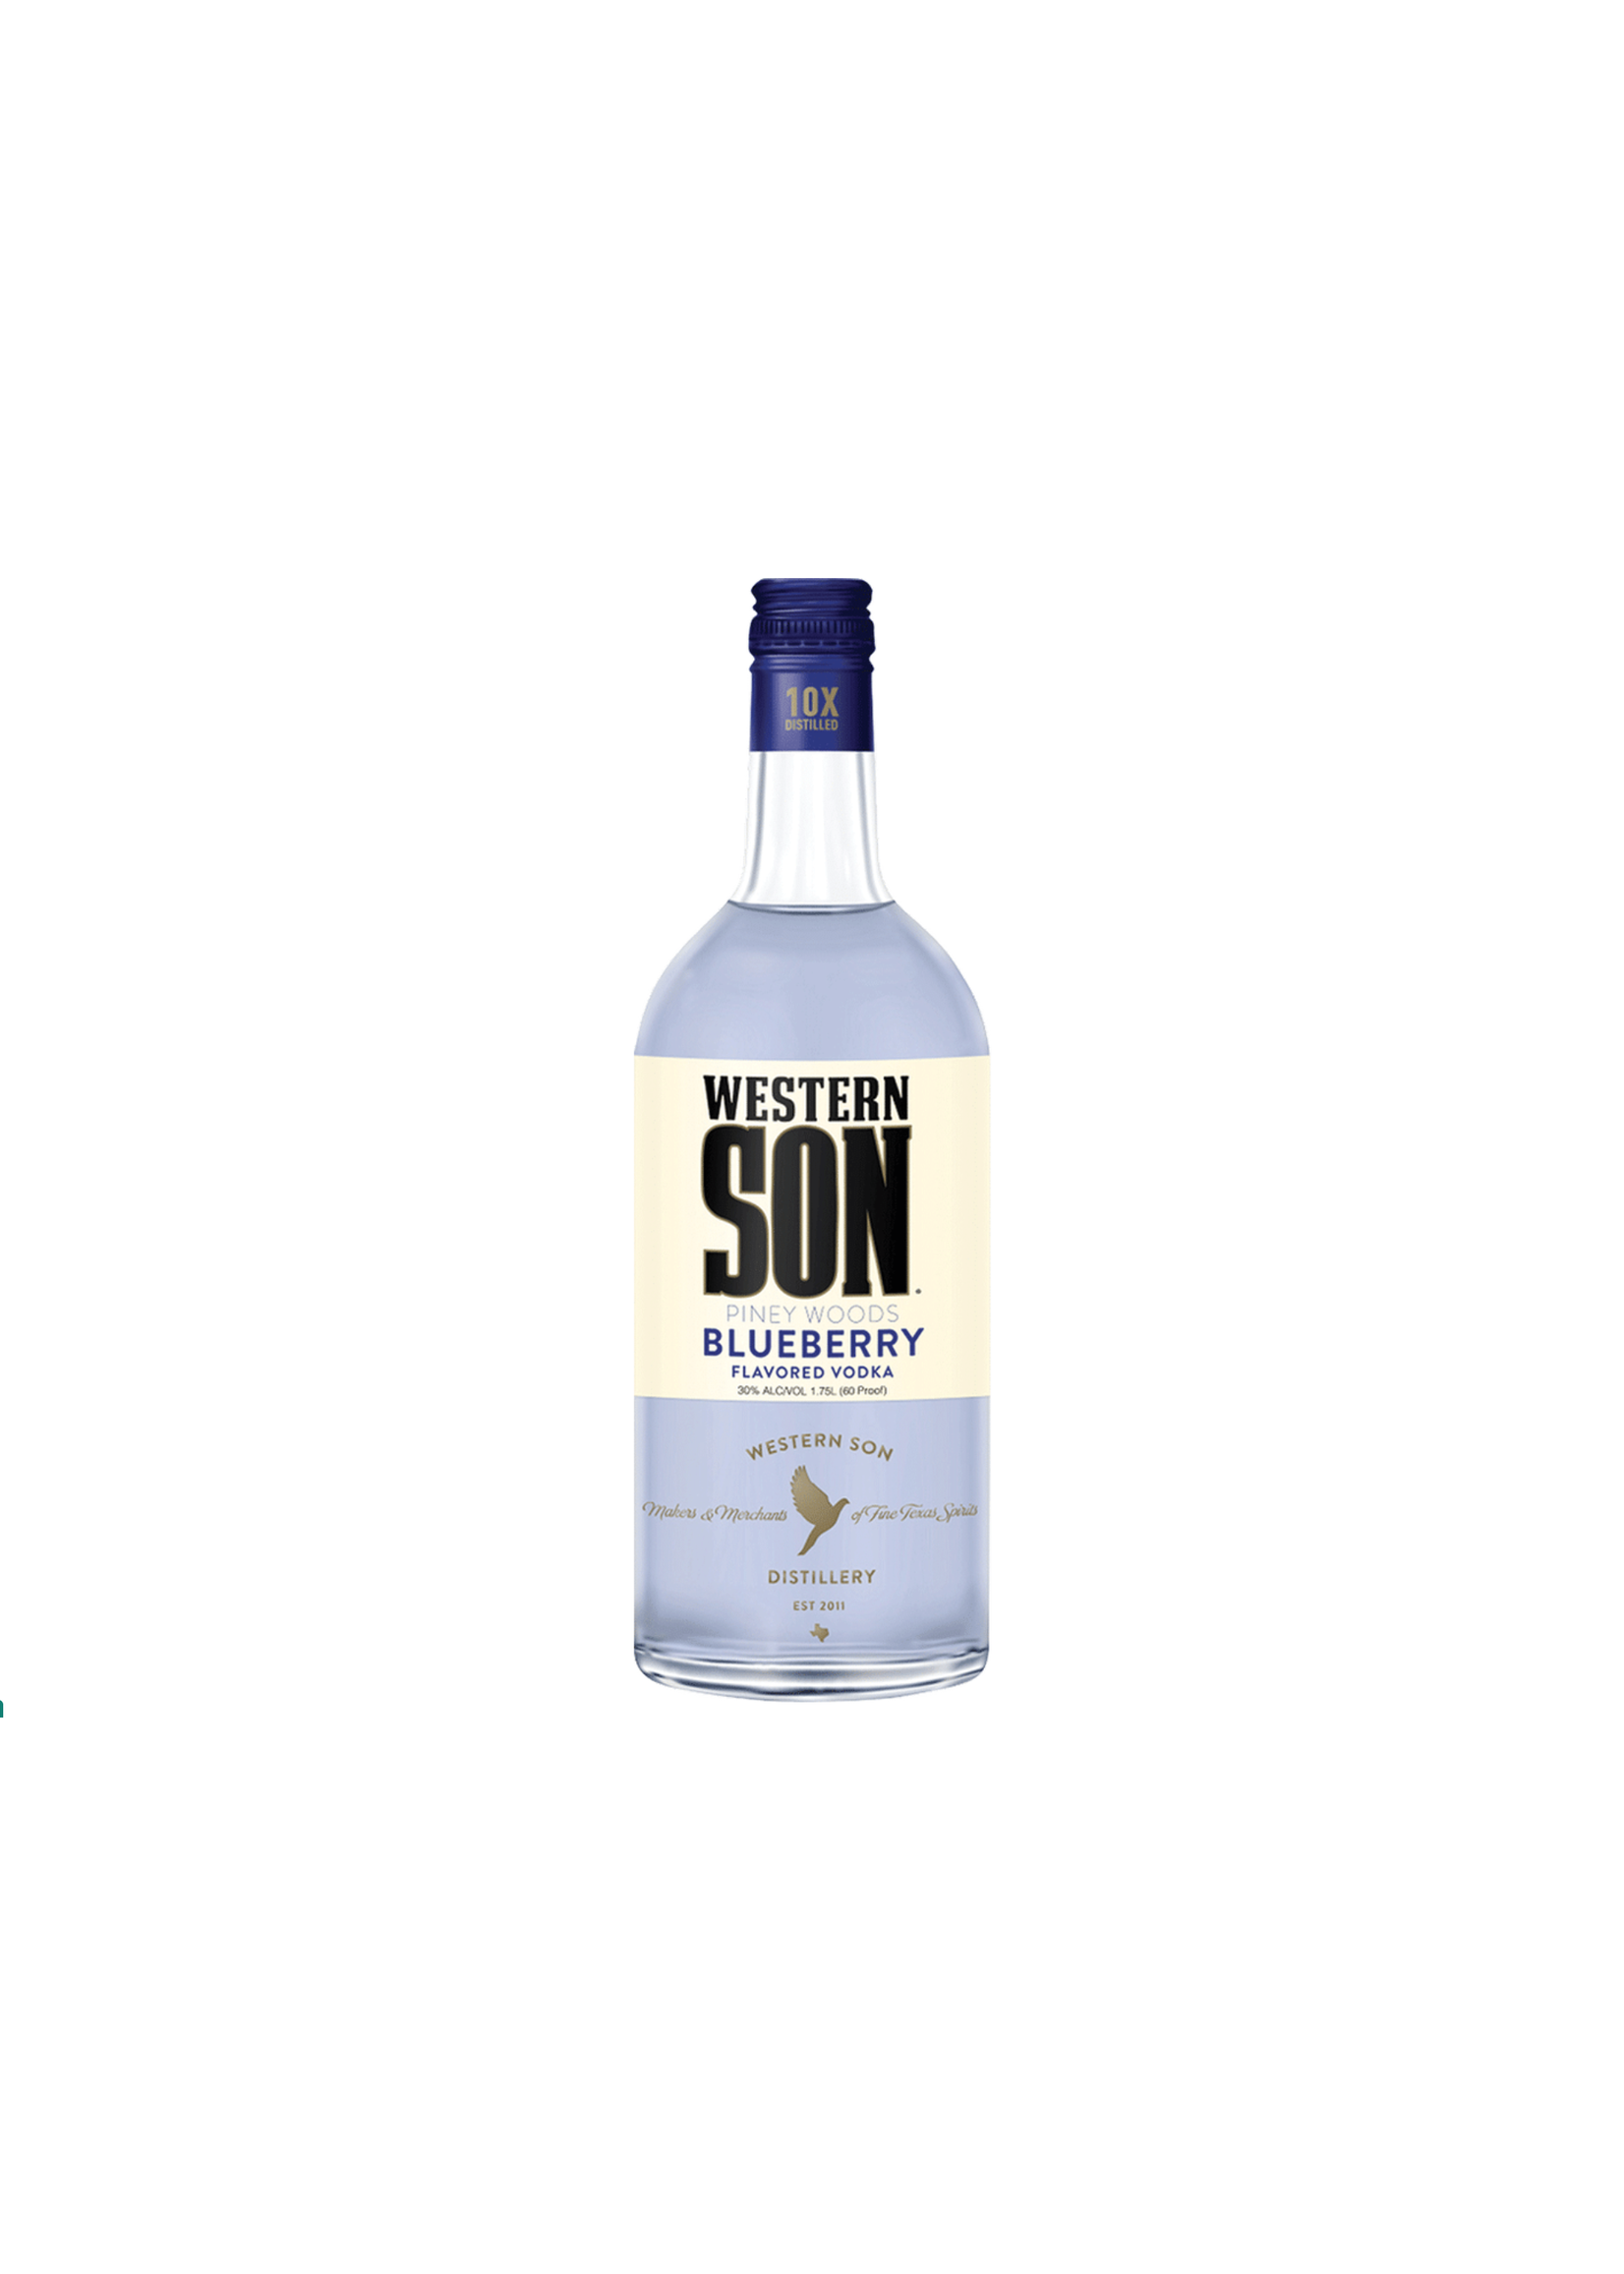 Western Son Western Son Blueberry Flavored Vodka 60Proof 1.75 Ltr